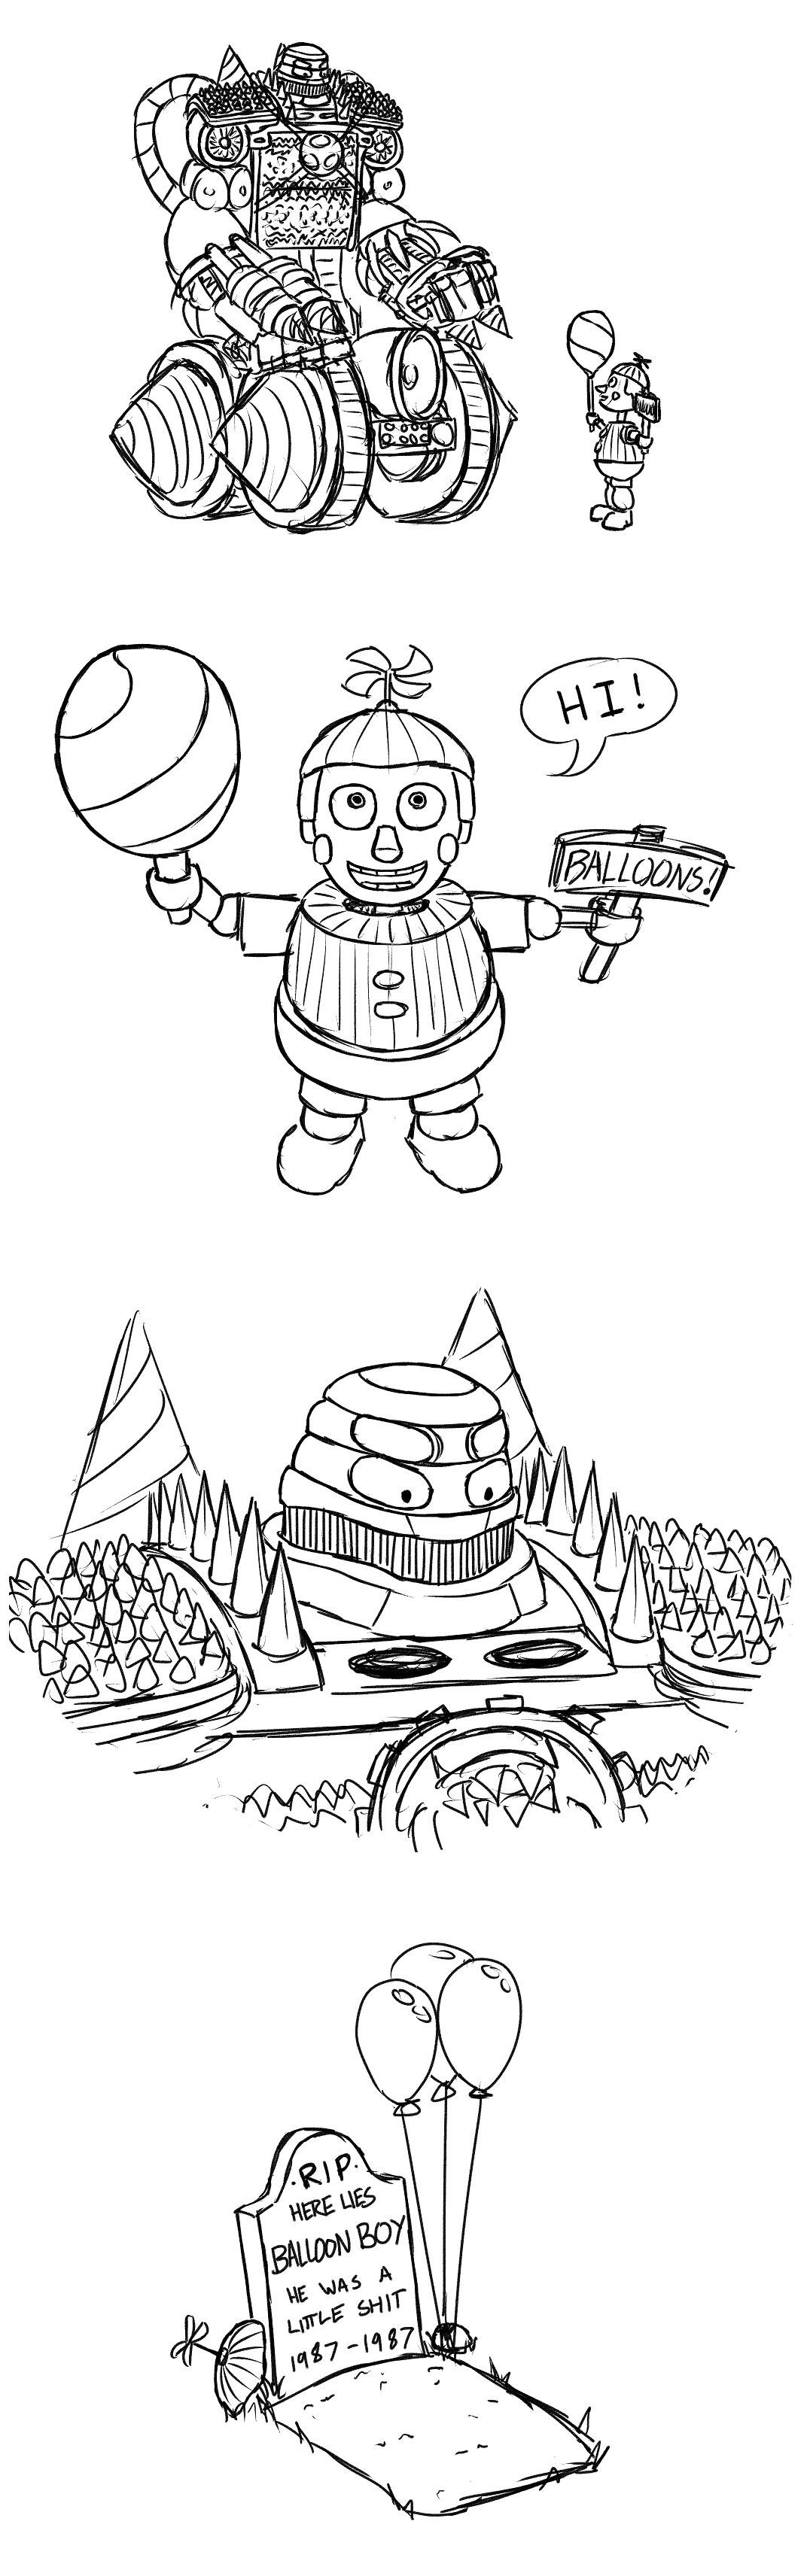 Fnaf Coloring Pages For Boys
 [Image ] Five Nights at Freddy s